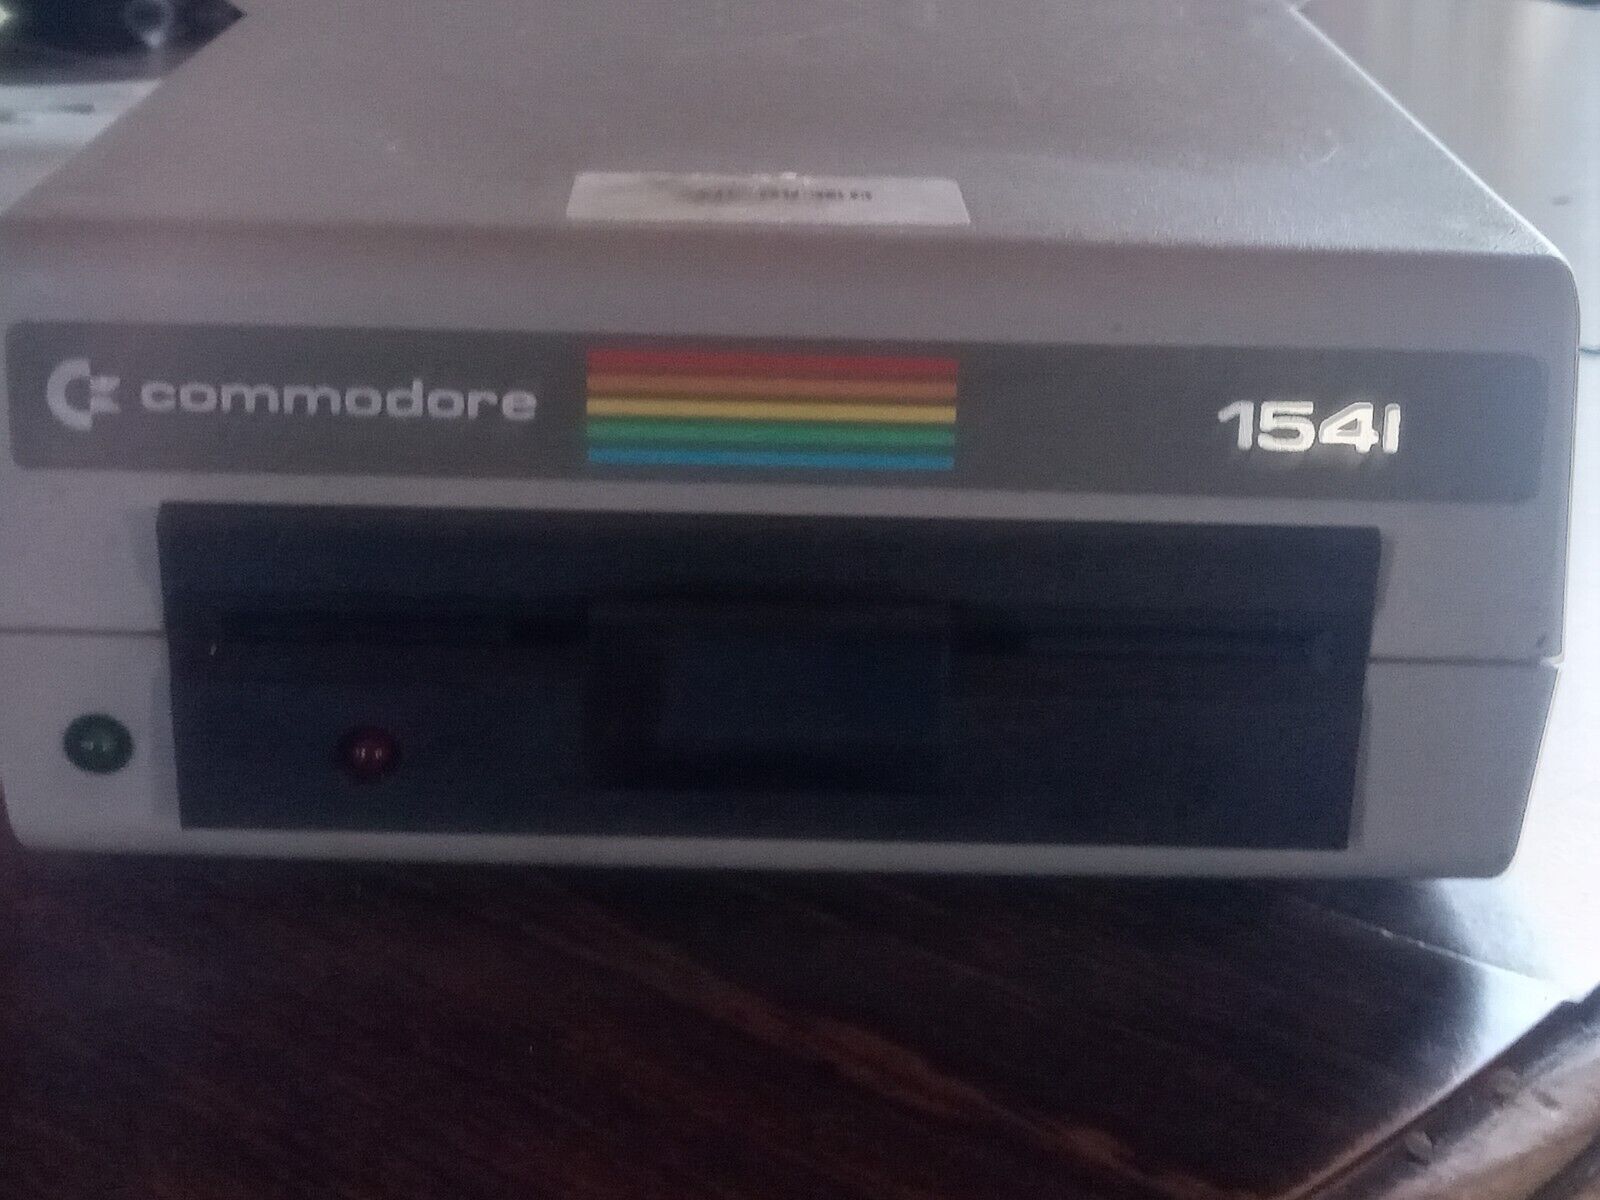 Vintage Commodore Floppy disk drive